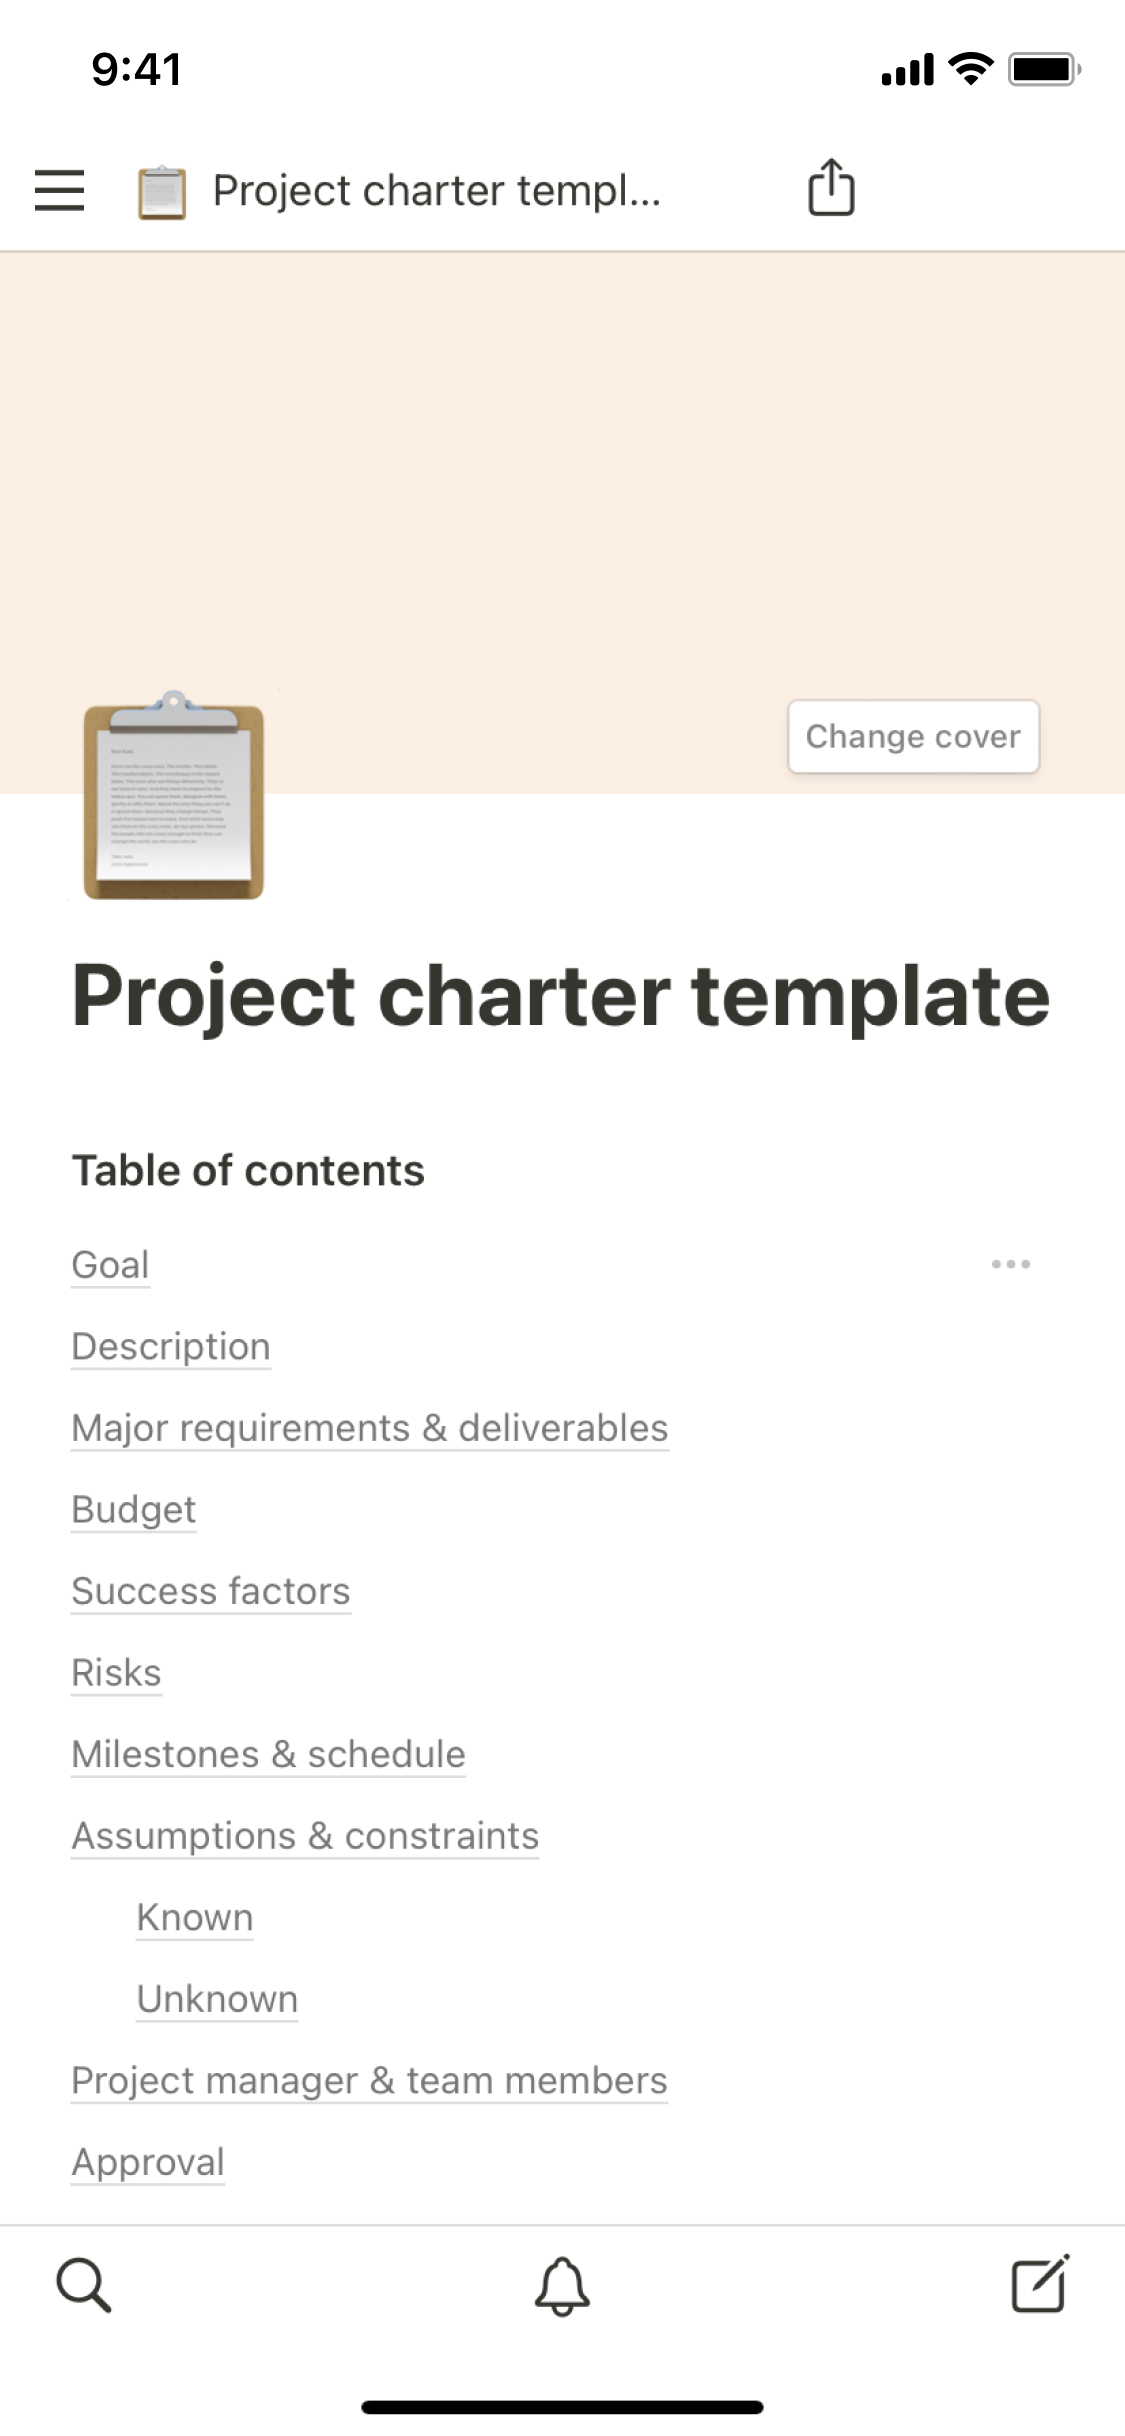 The mobile image for the Project charter template template